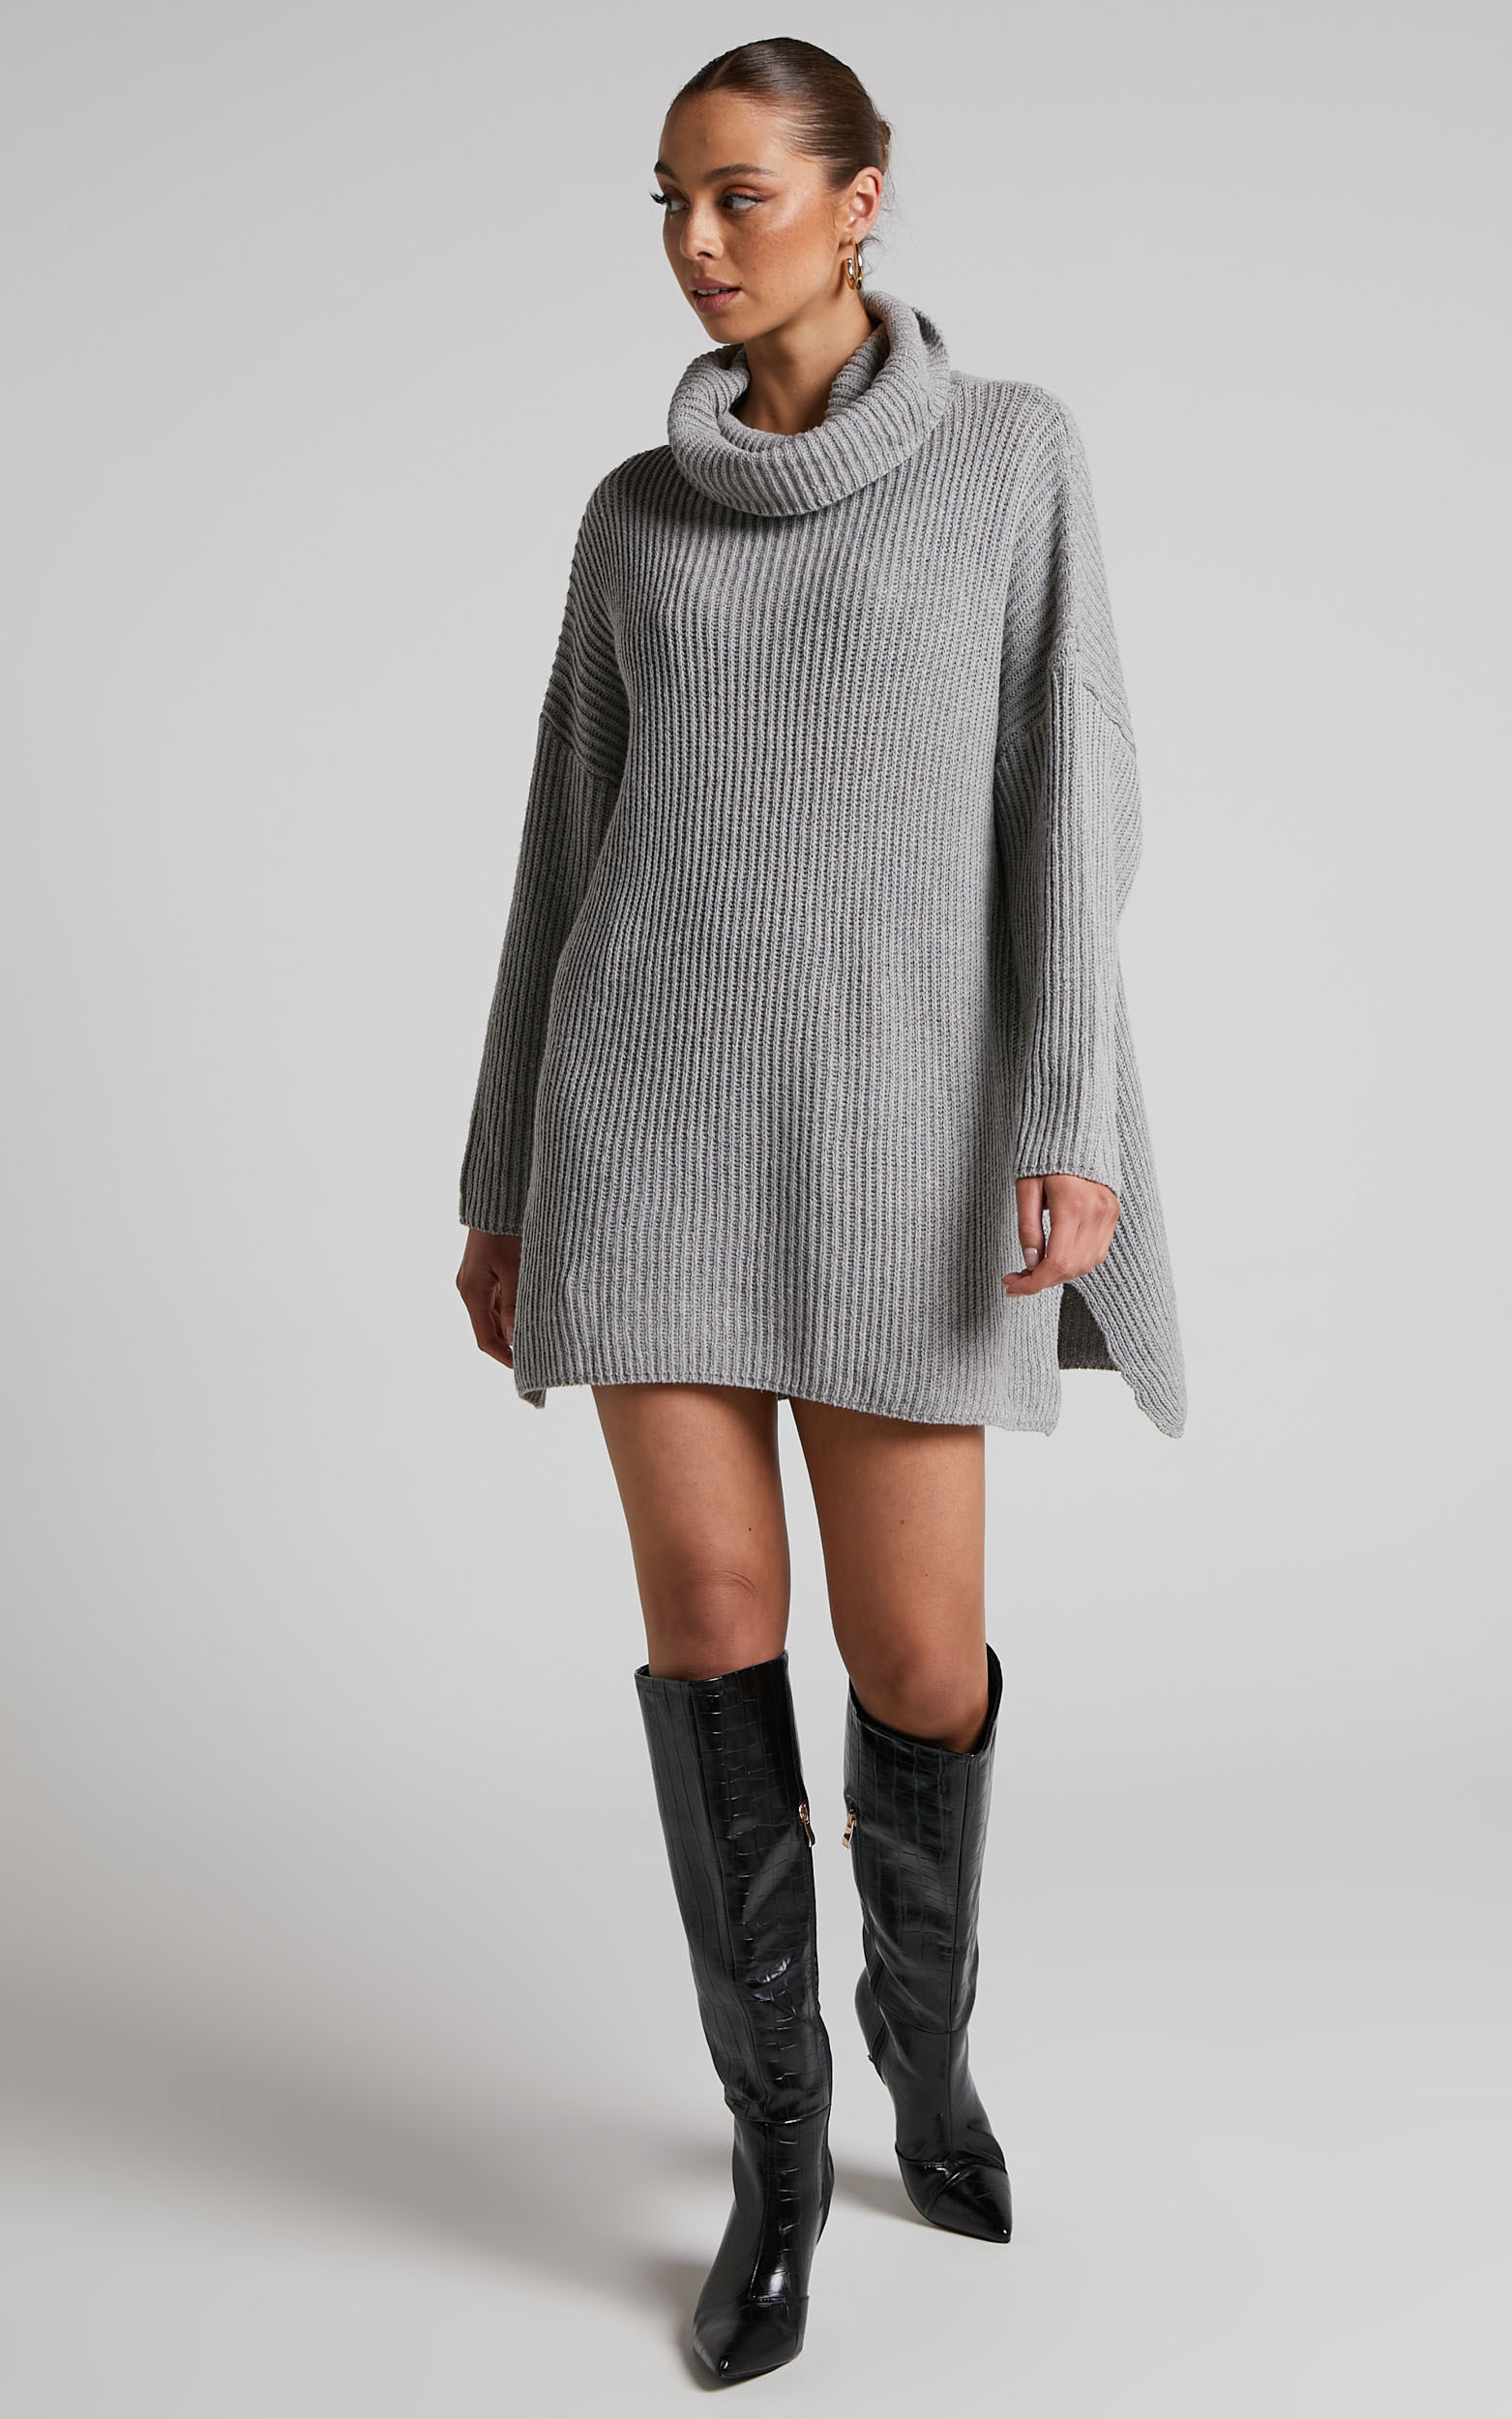 Ariene Oversized Turtle Neck Knit  Jumper Dress in Grey - 04, GRY2, hi-res image number null